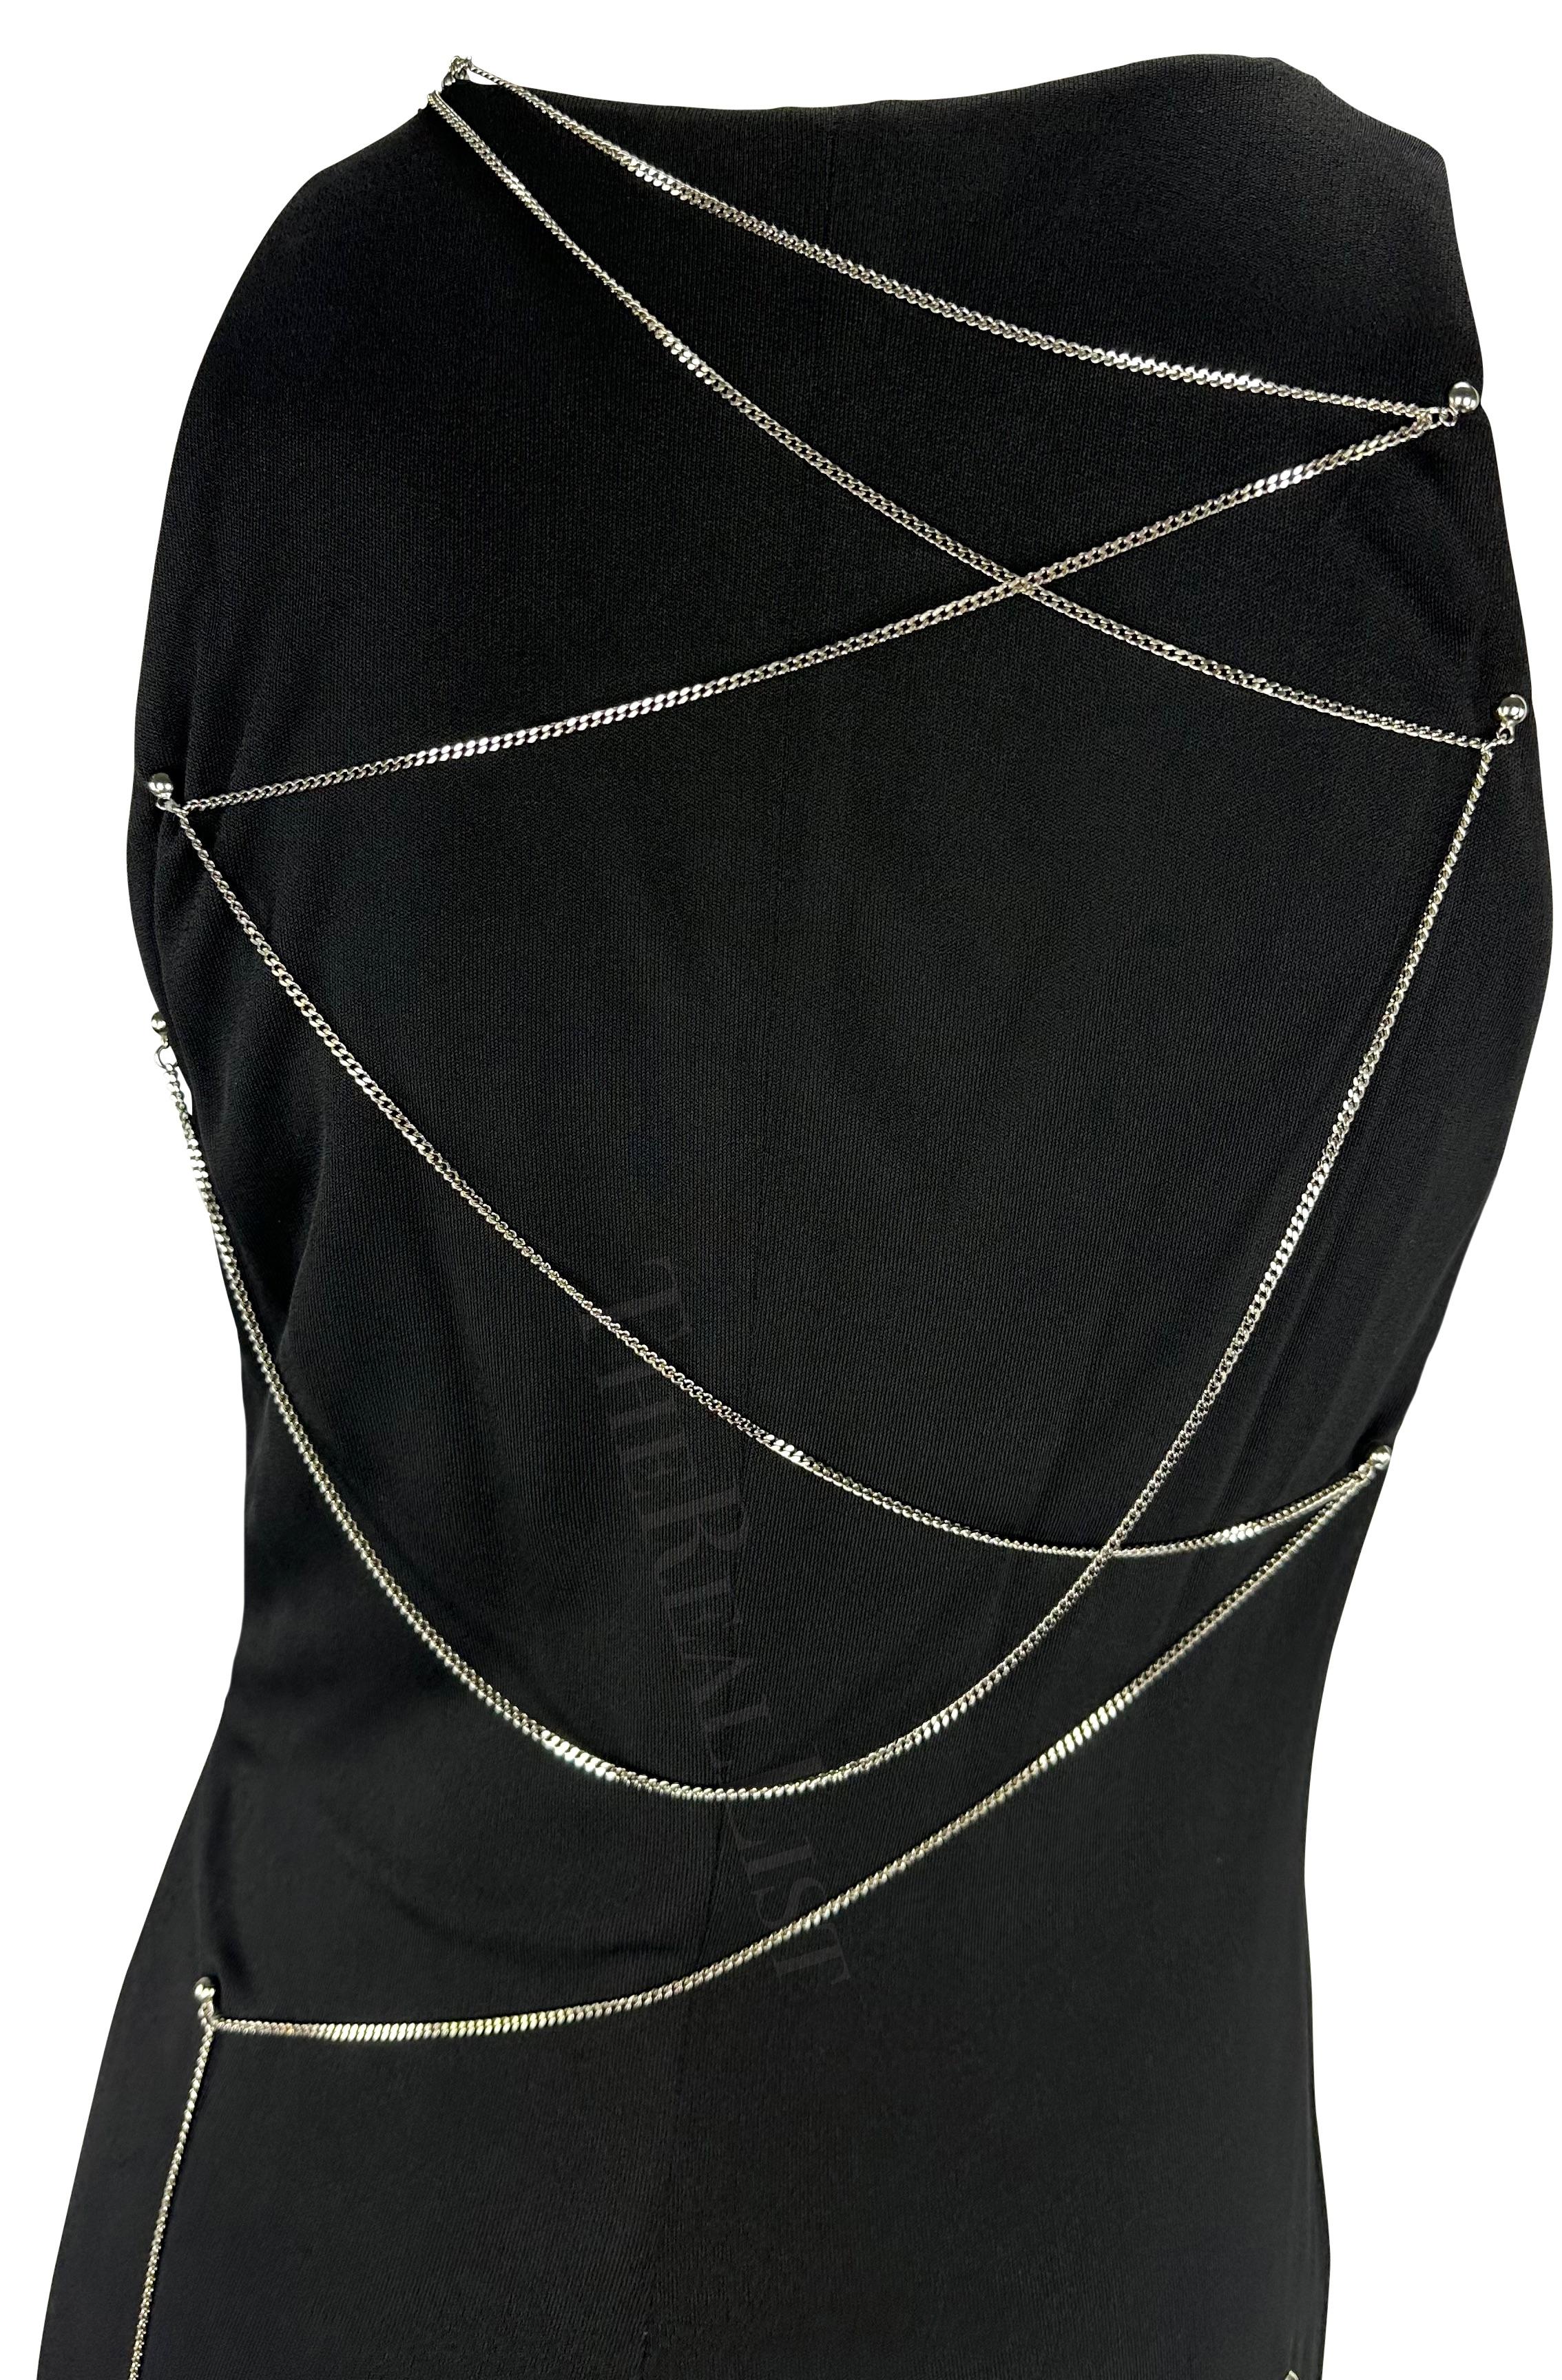 Presenting a black knit Gianni Versace slip dress, designed by Donatella Versace. From 1999, this dress features a v-neckline that is lined with silver-tone chain detailing. The back of this dress is made complete with a matching silver chain that